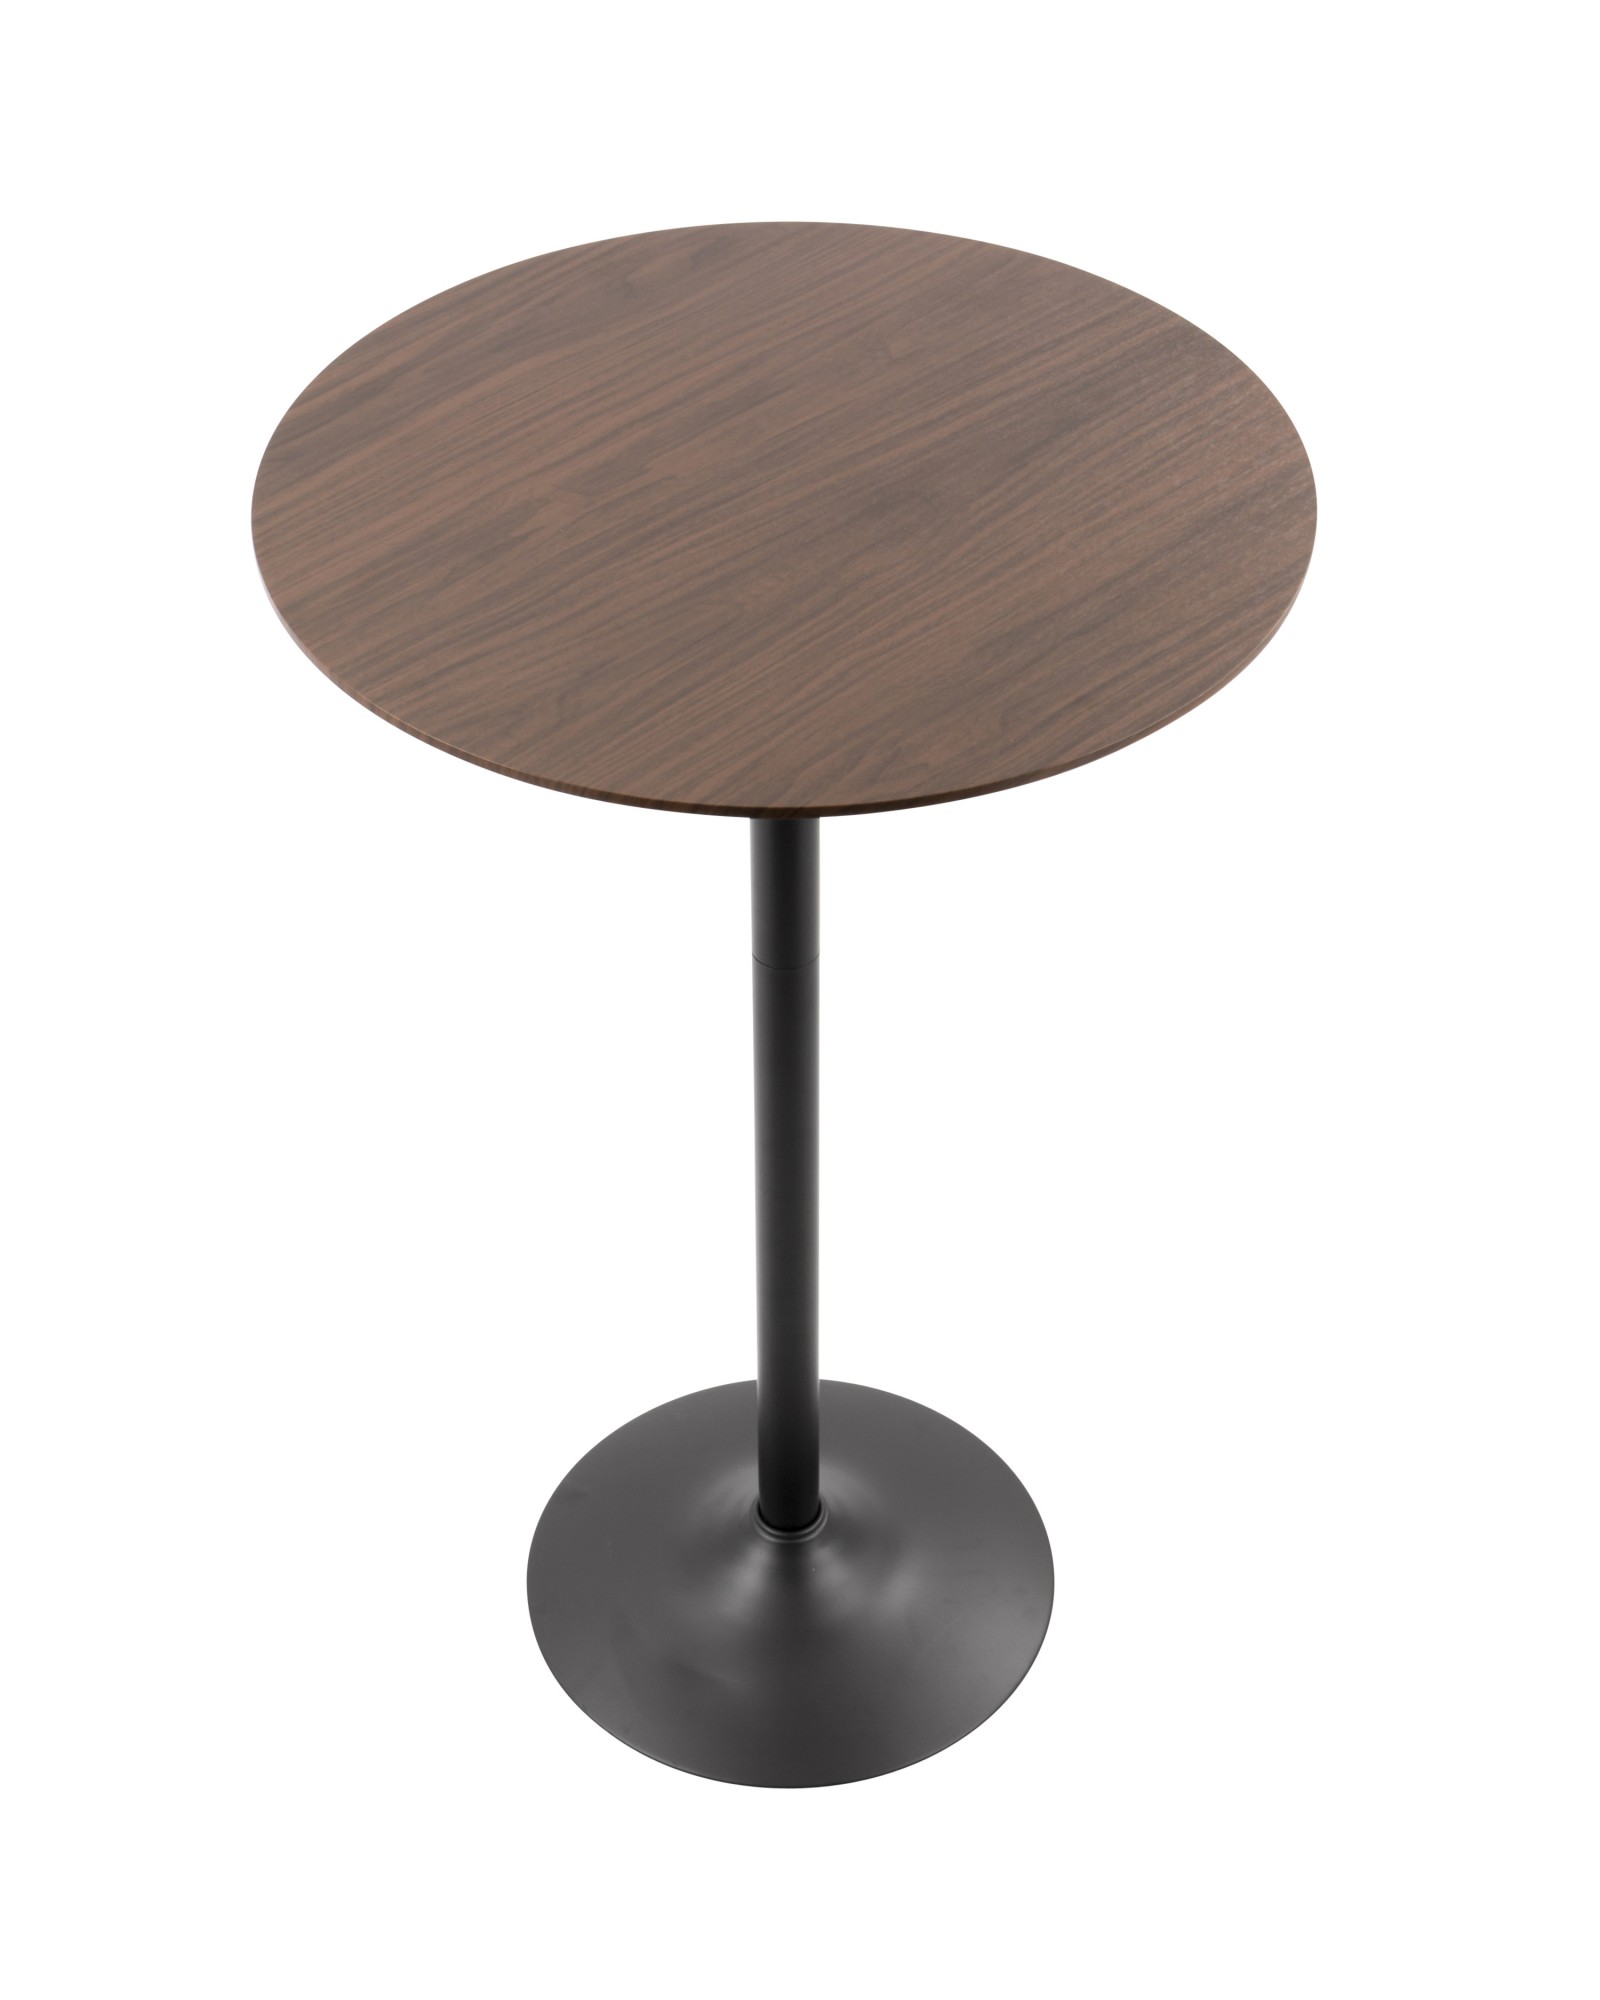 Pebble Mid-Century Modern Adjustable Bar/Counter Table in Walnut and Black